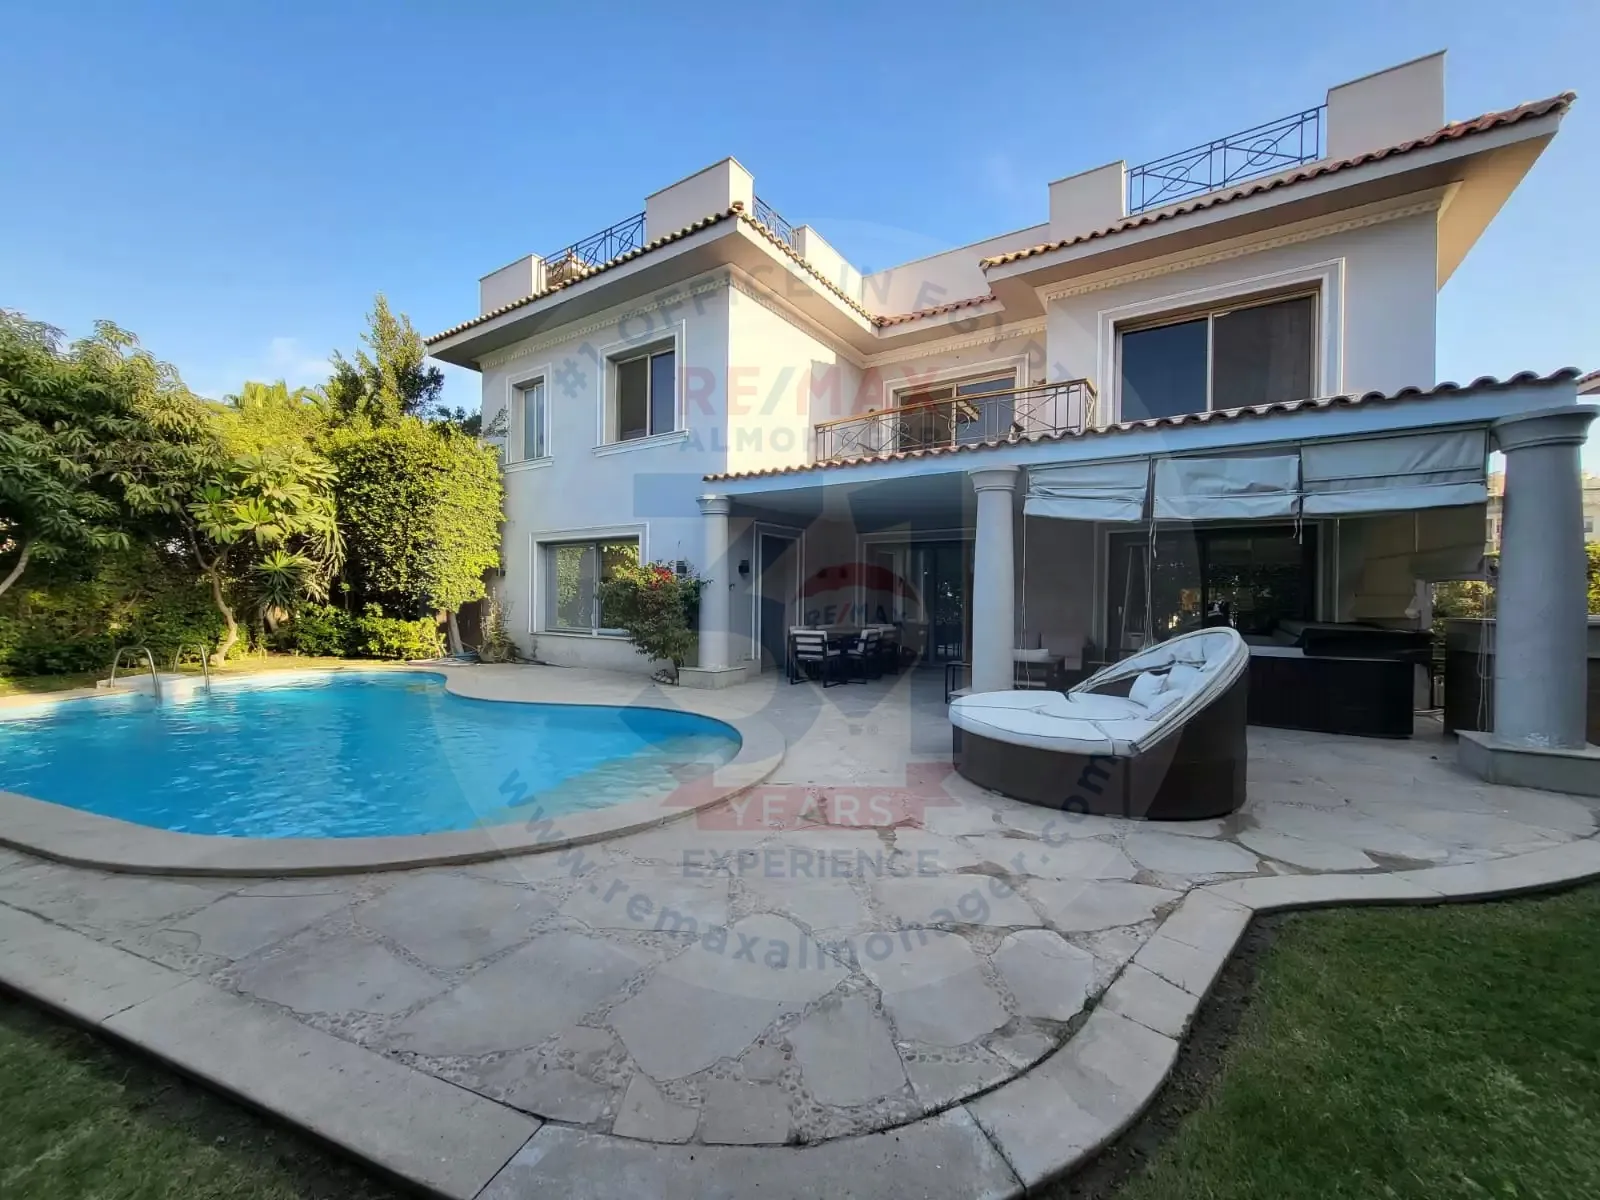 Properties for rent super lux with pool